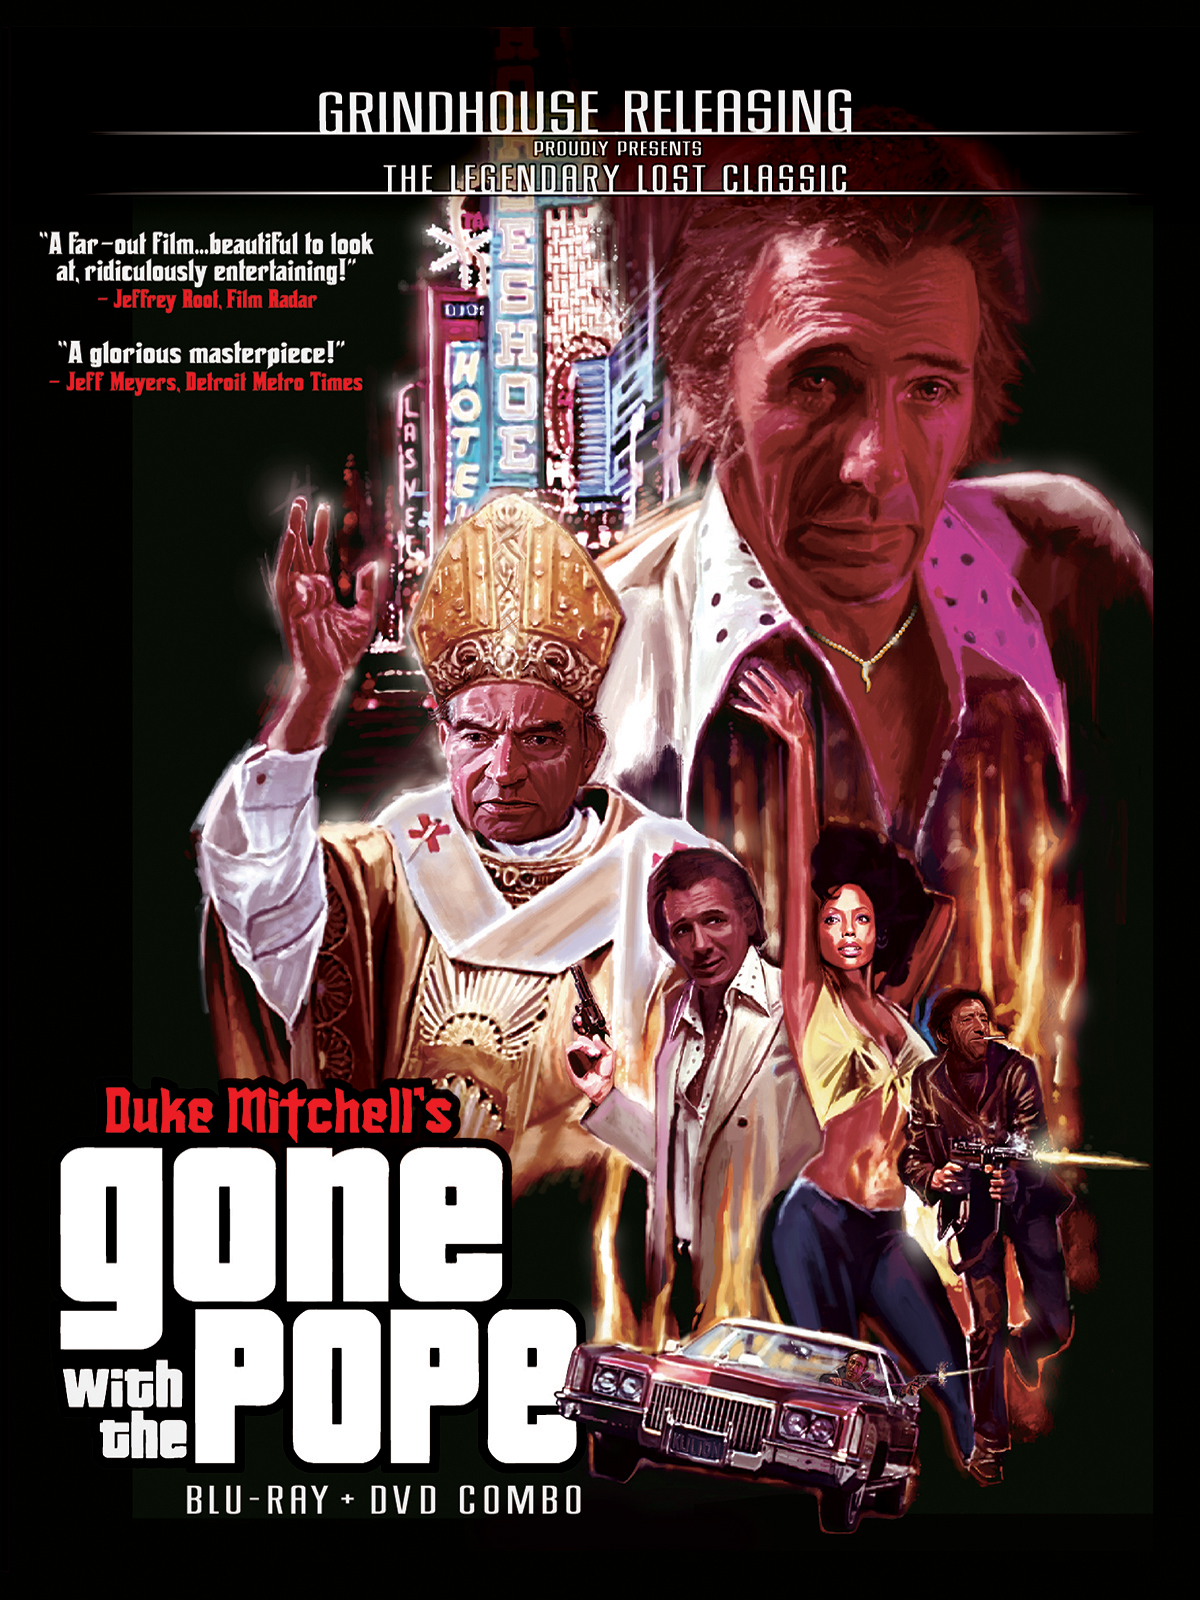 Gone with the Pope Blu-ray + DVD combo. Directed by and starring Duke Mitchell: Grindhouse Releasing